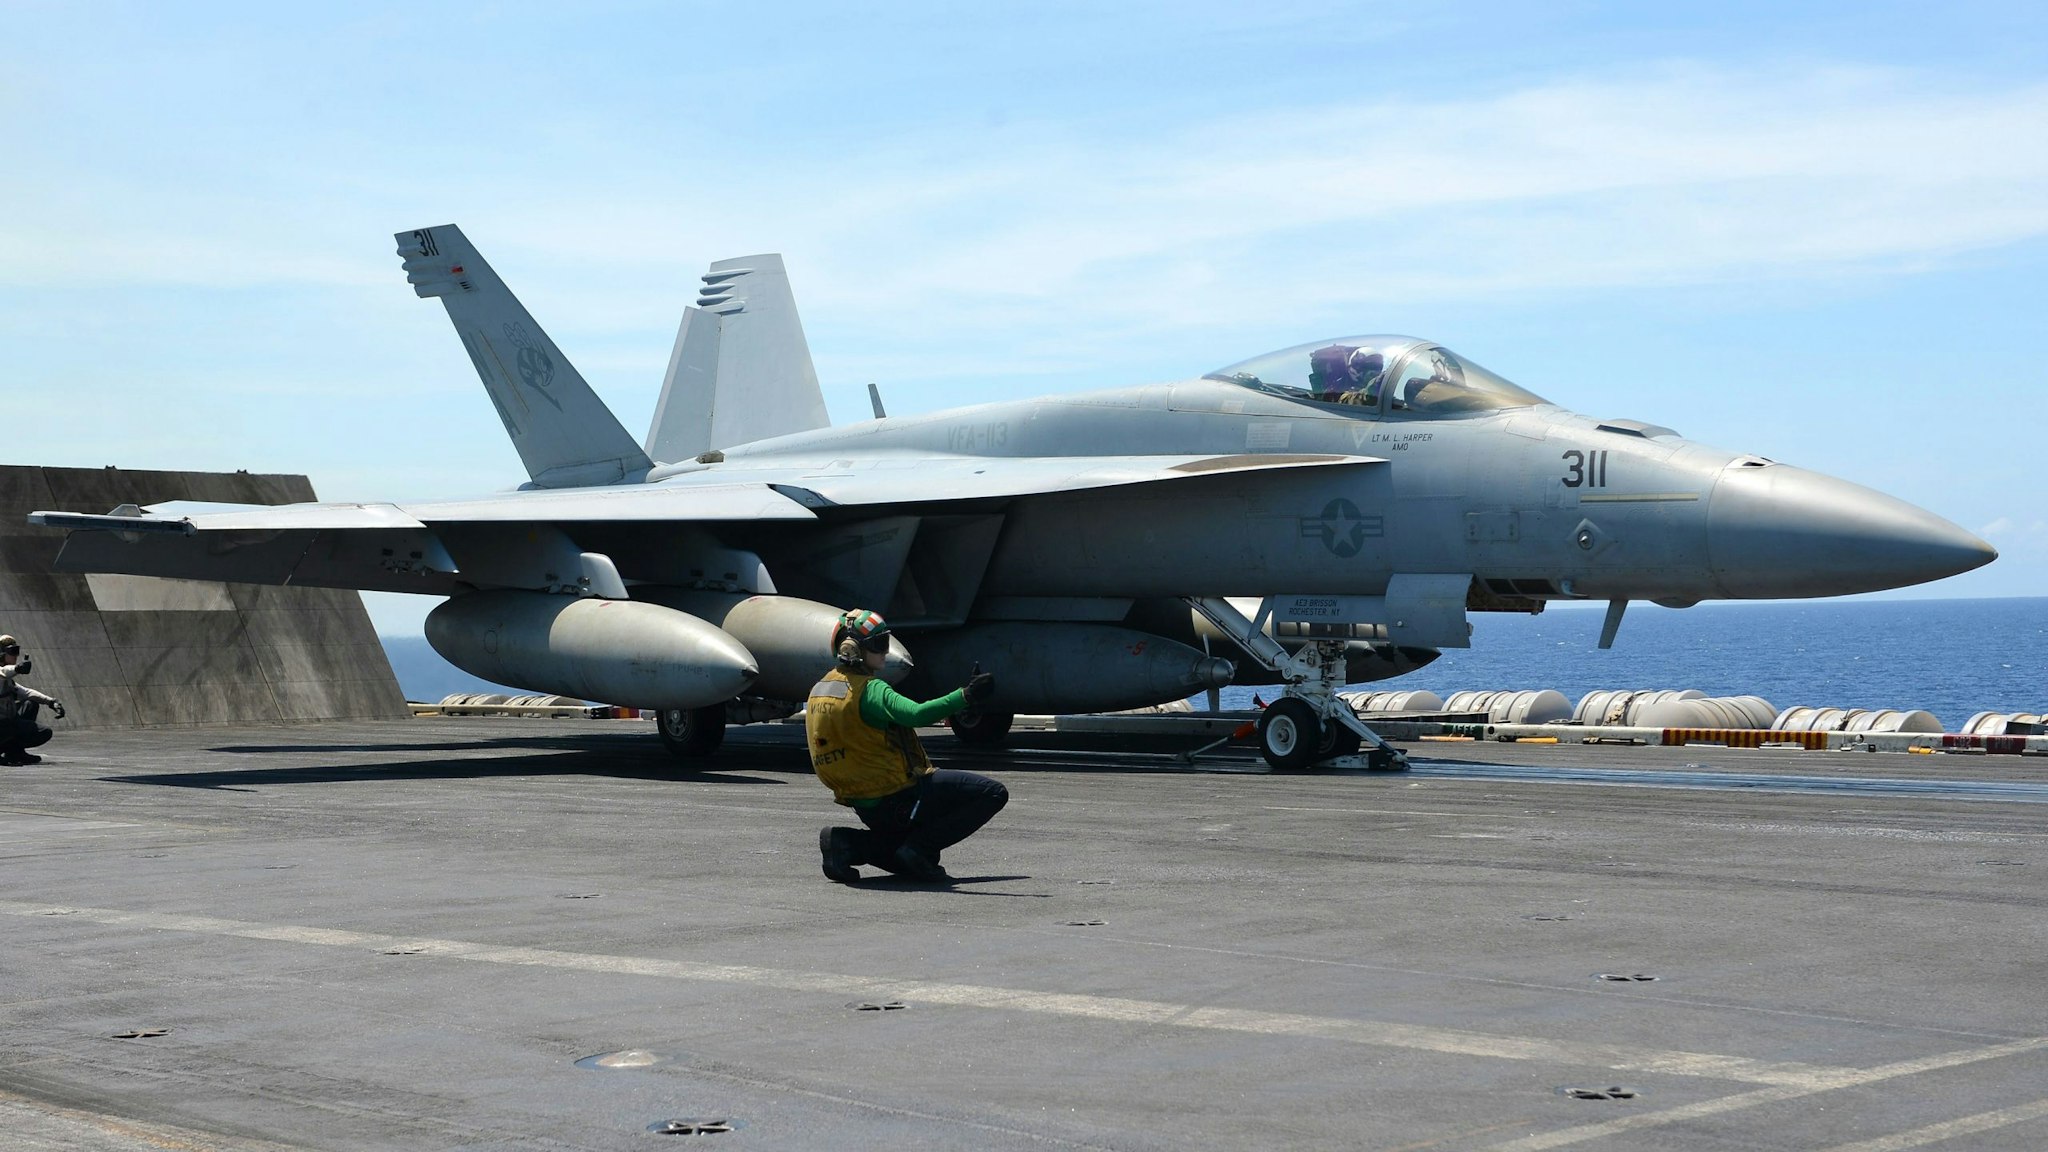 A sailor signals an FA-18 hornet fighter jet to take off during a routine training aboard US aircraft carrier Theodore Roosevelt in the South China sea on April 10, 2018. The carrier group Theodore Roosevelt is transiting through the South China sea on its way to the Philippines from Singapore after participating in Operations Inherent Resolve (OIR) and Operation Freedom's Sentinel (OFS) in Syria, Iraq and Afghanistan.